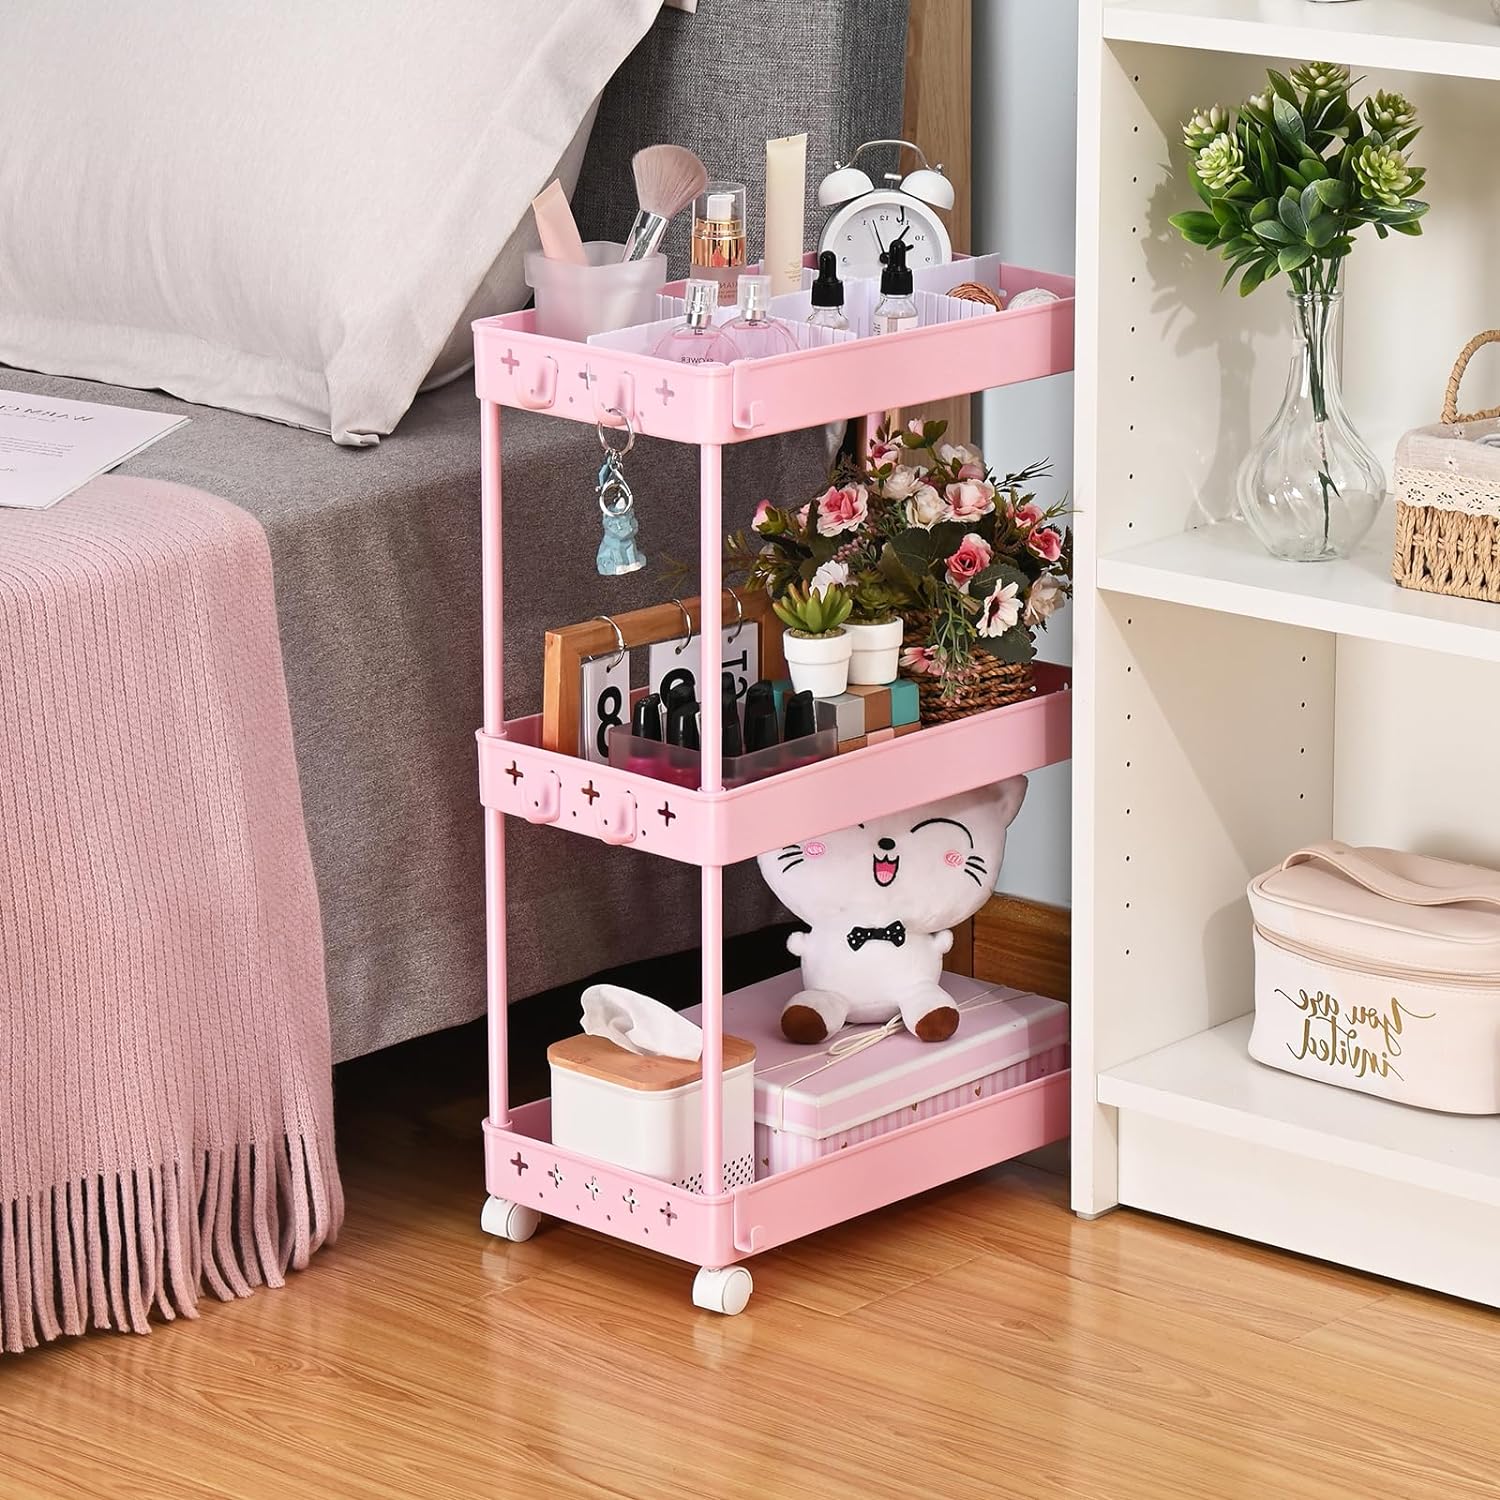 My daughter uses this for a little make up cart and it was easy to put together and perfect for a small area